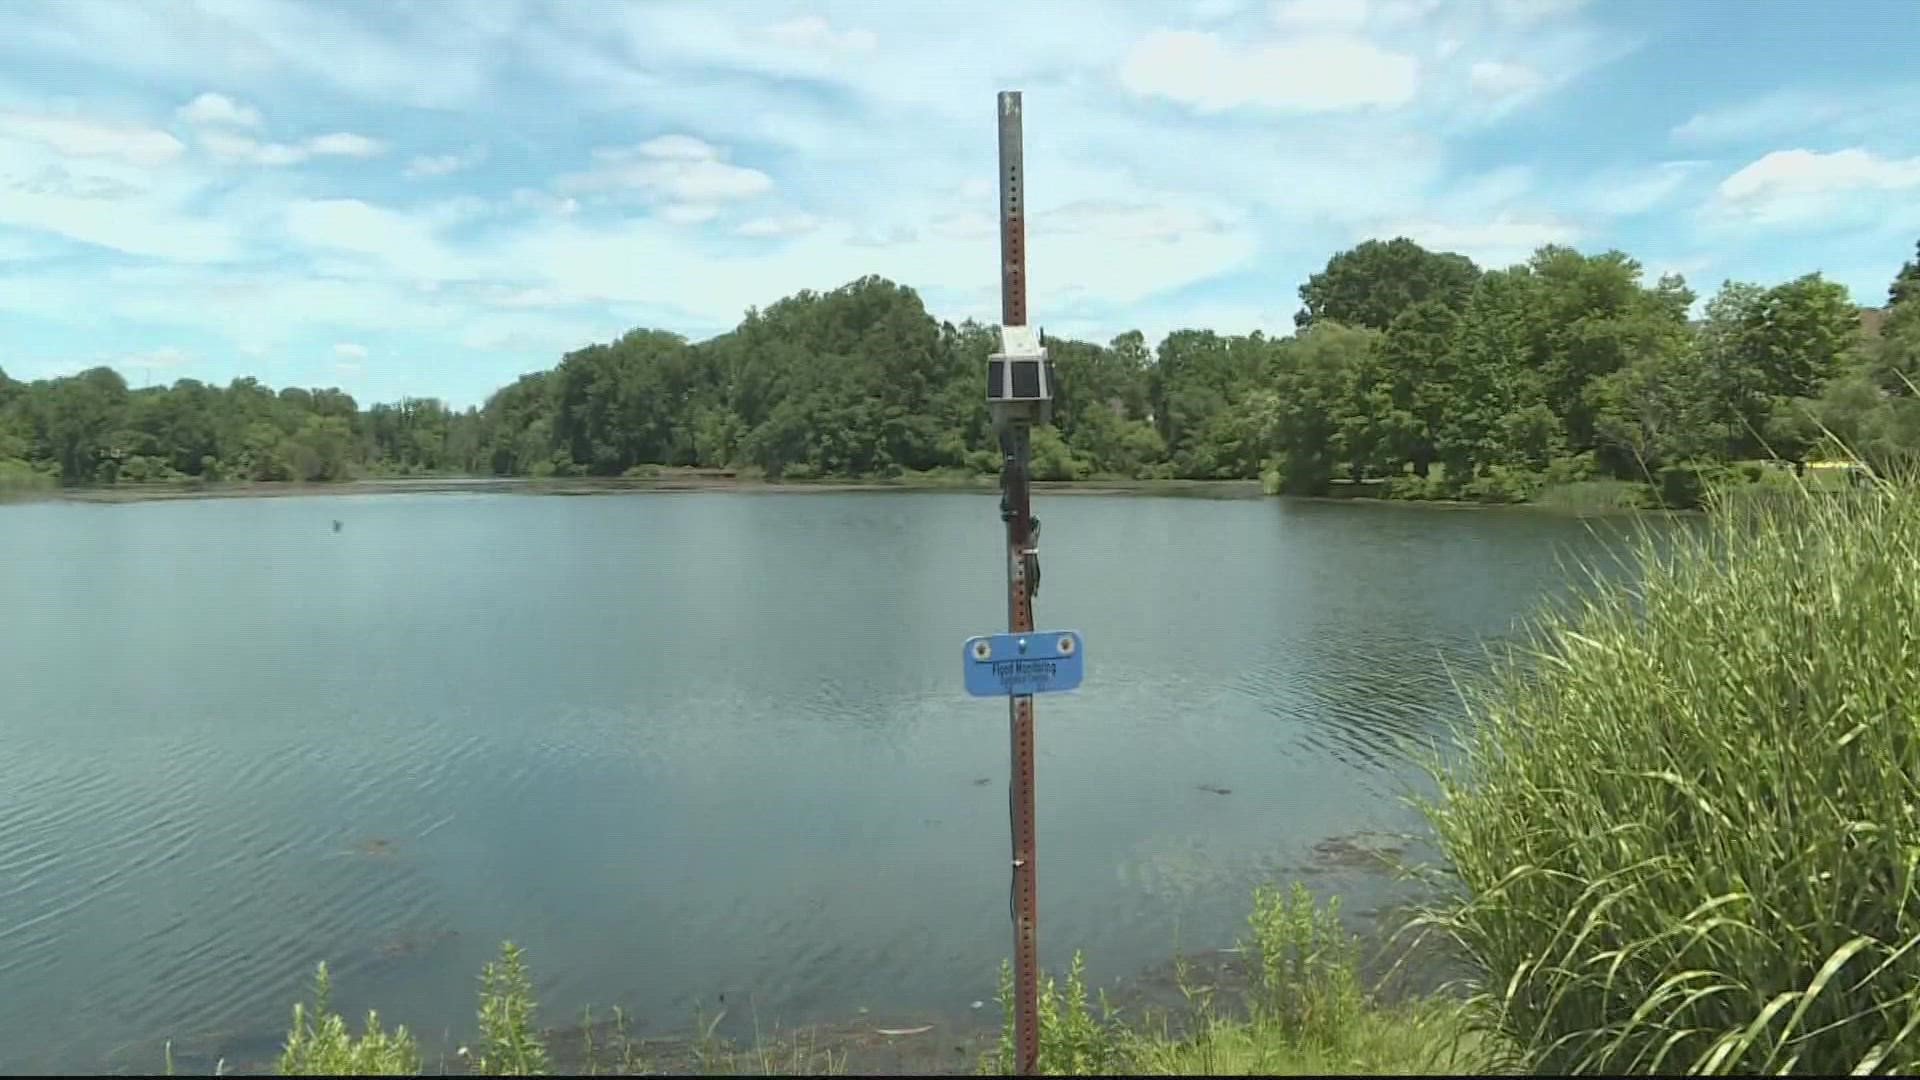 One of the new high-tech sensors will be installed near the Rock Creek Woods apartments where a 19-year-old died in flash flooding in 2021.